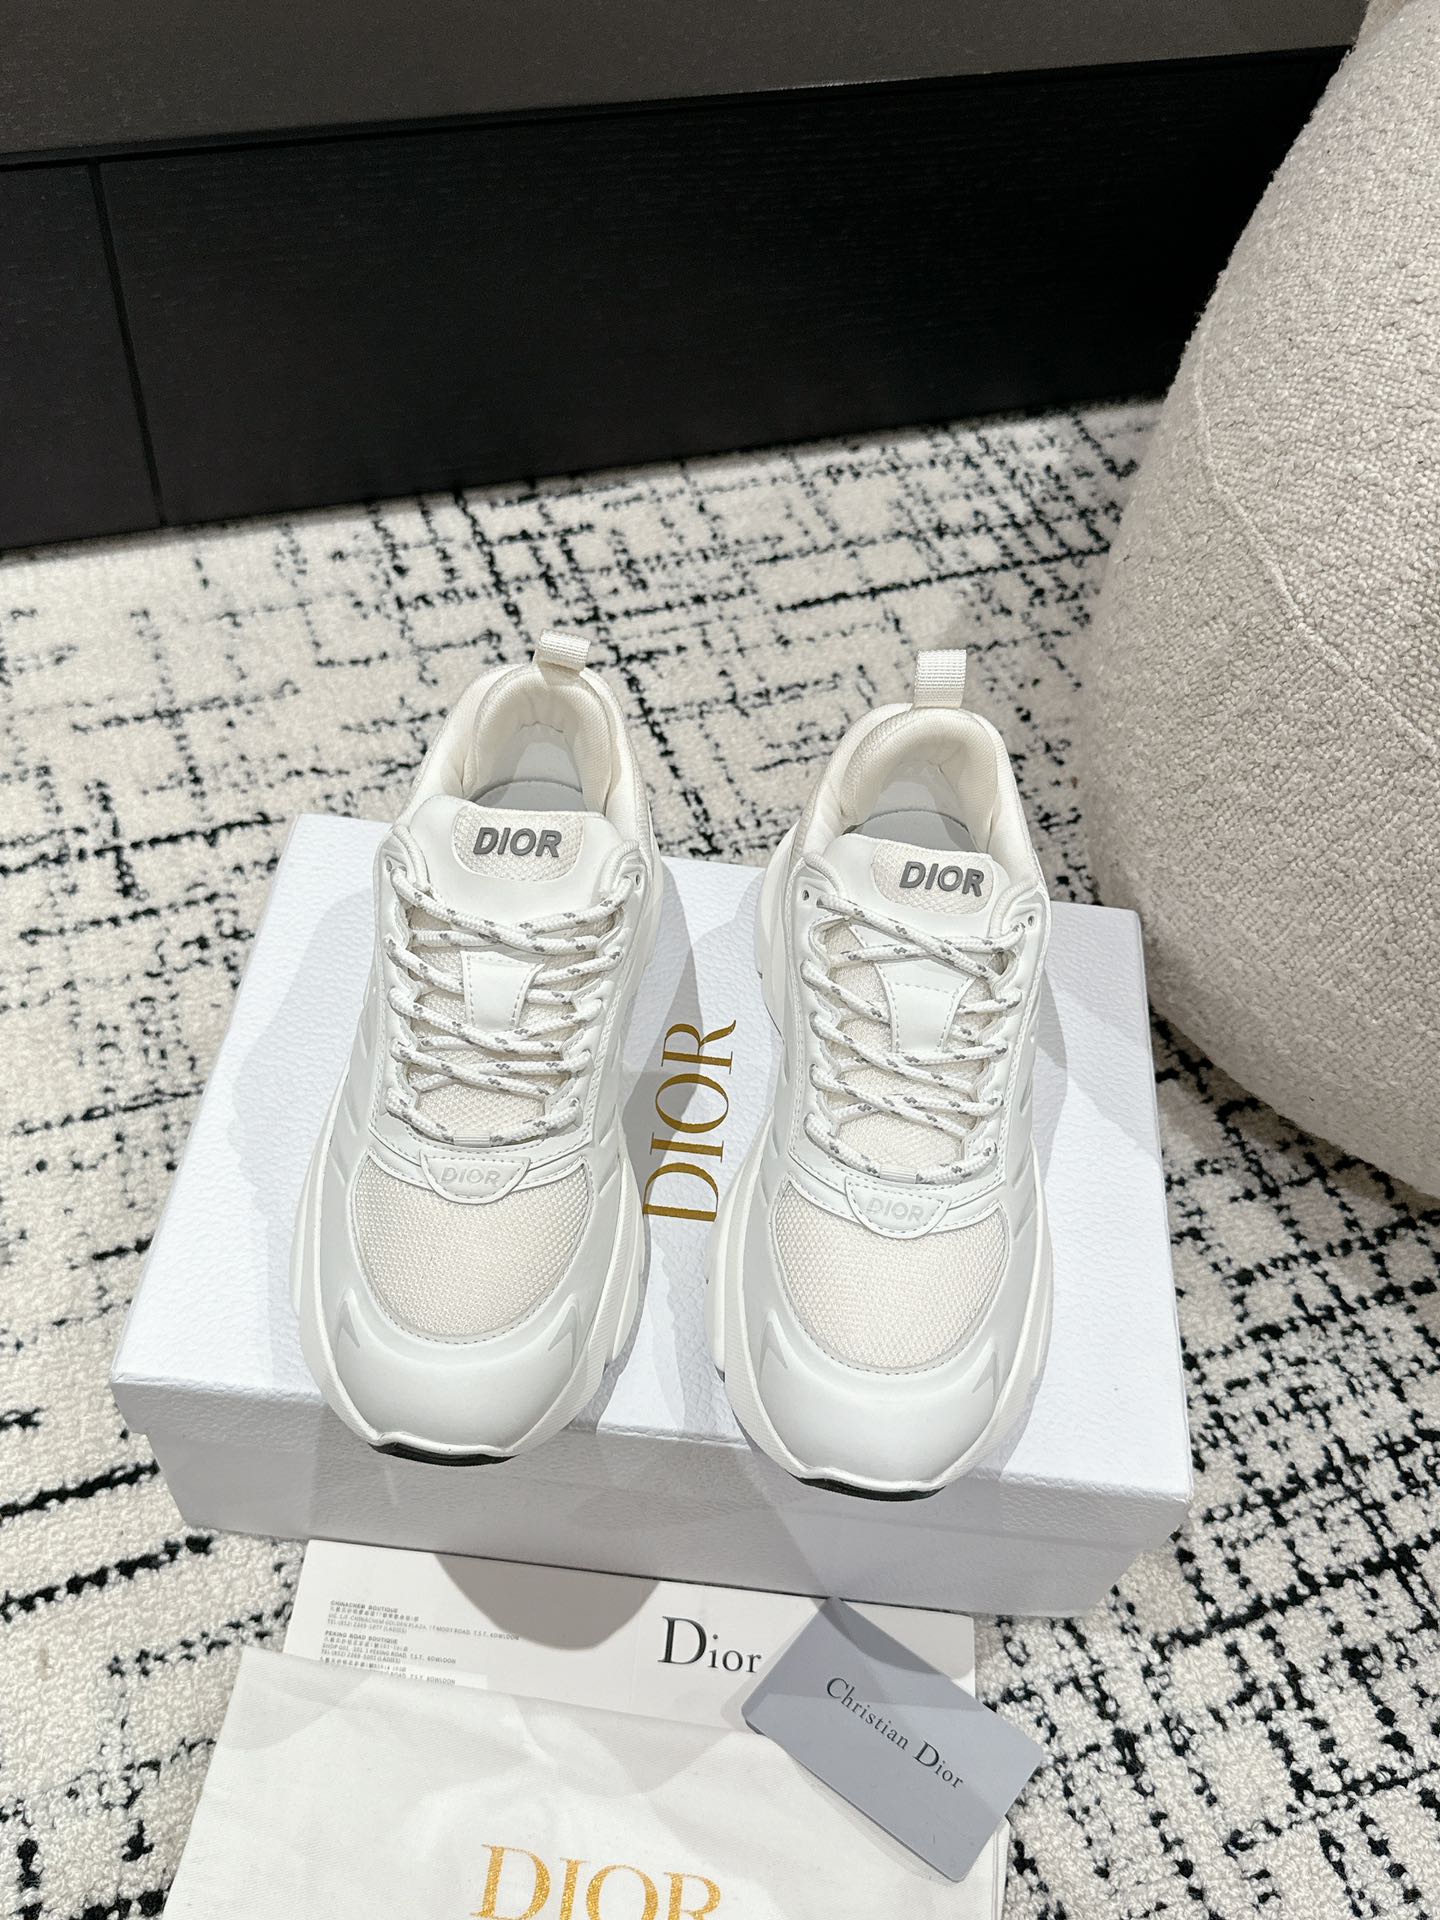 Dior Shoes Sneakers Splicing Cowhide Mesh Cloth Fall Collection Vintage Casual